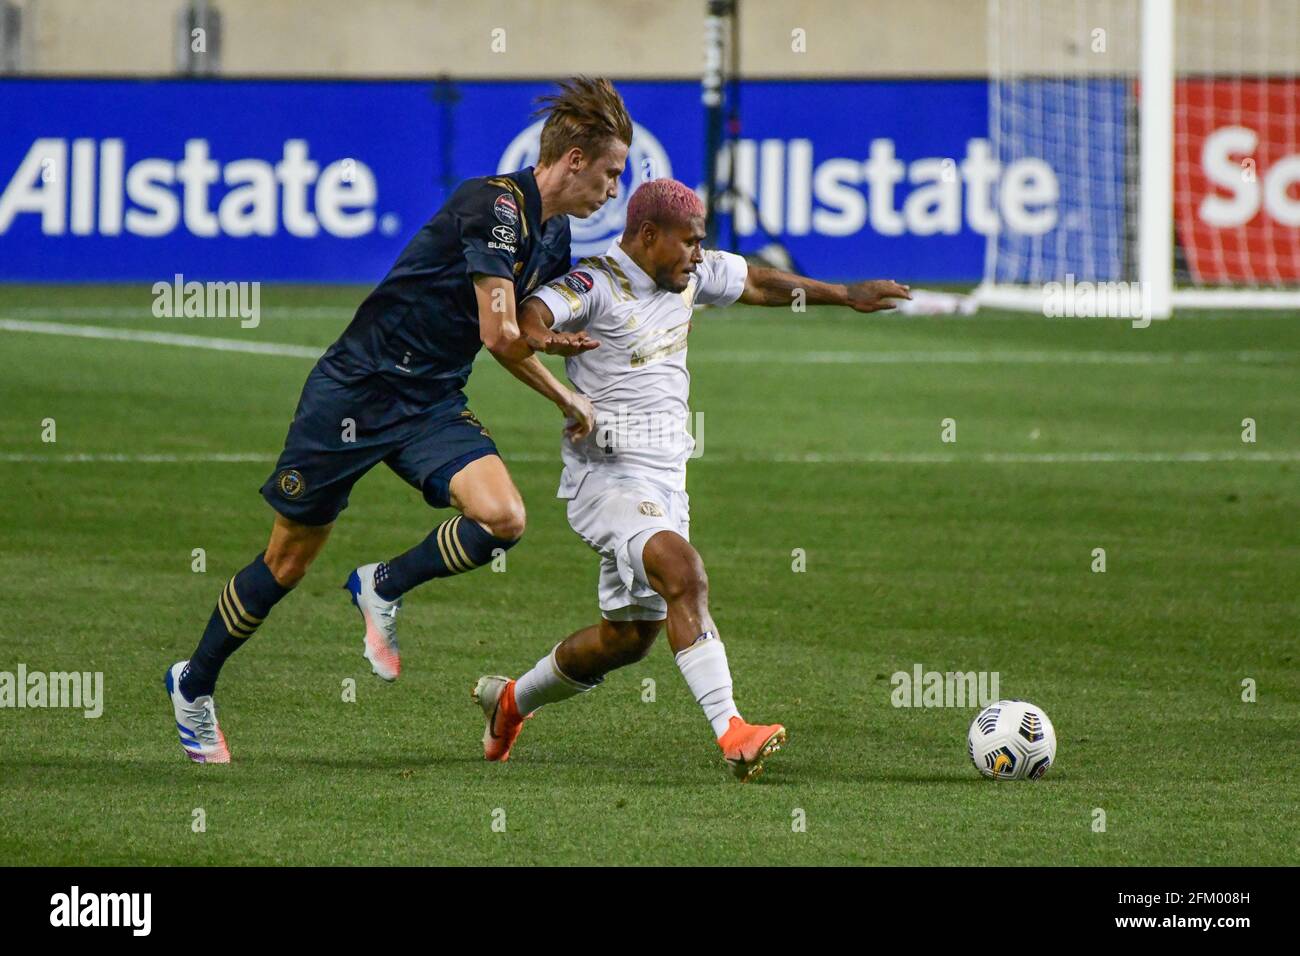 Jack Elliot competes with Josef Martinez during a 1-1 2nd leg tie. the Philadelphia Union advance to the semi-finals with a 4-1 aggregate score. Credit: Don Mennig/Alamy Live News Stock Photo